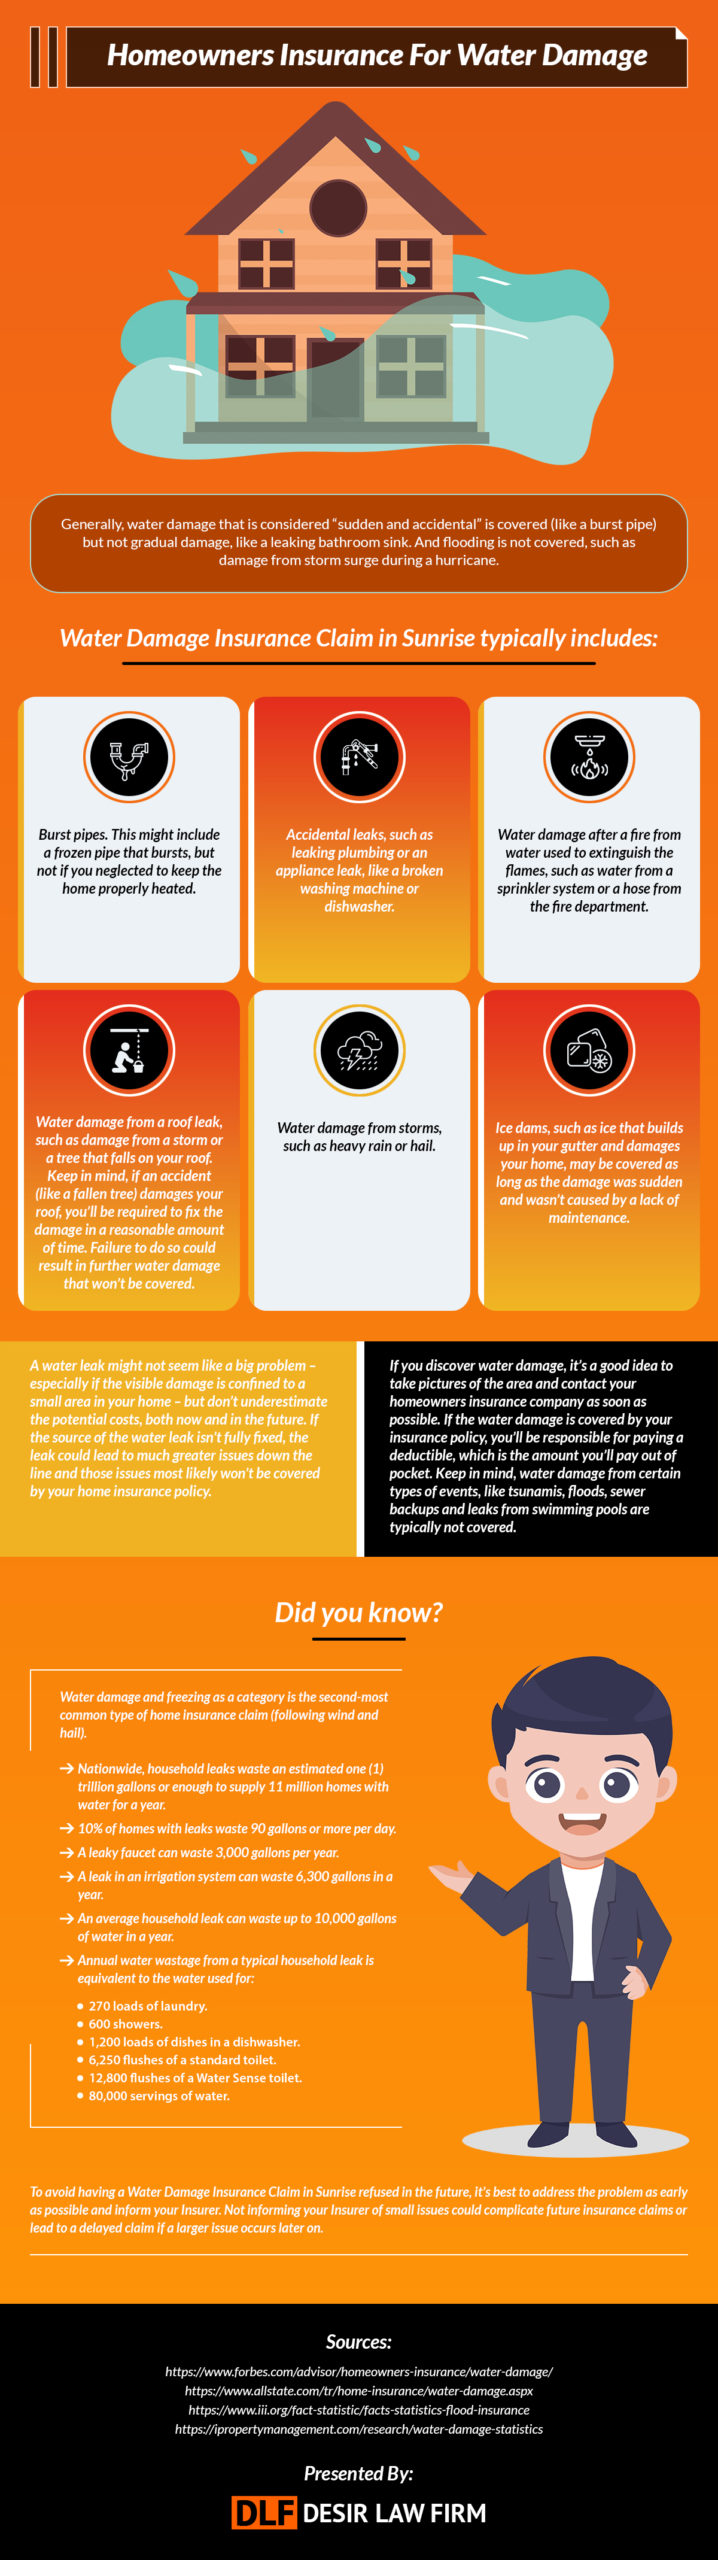 [Infographic] Homeowners Insurance For Water Damage